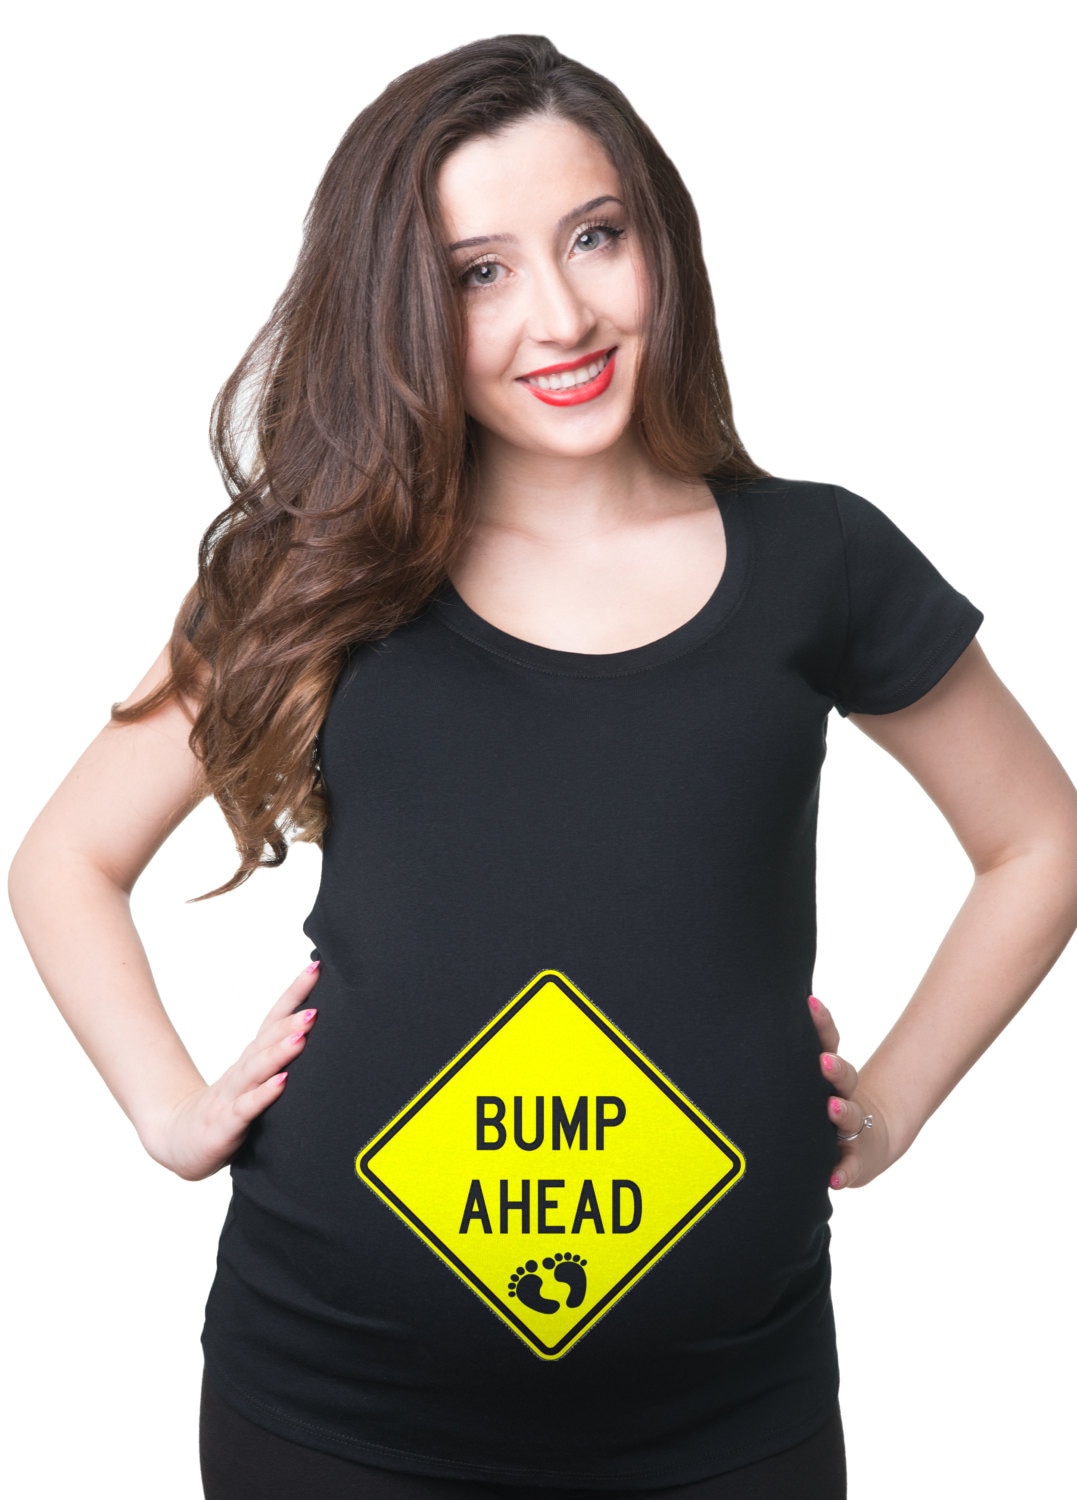 What the Bump Wants the Bump Gets – Extra Thankful This Year